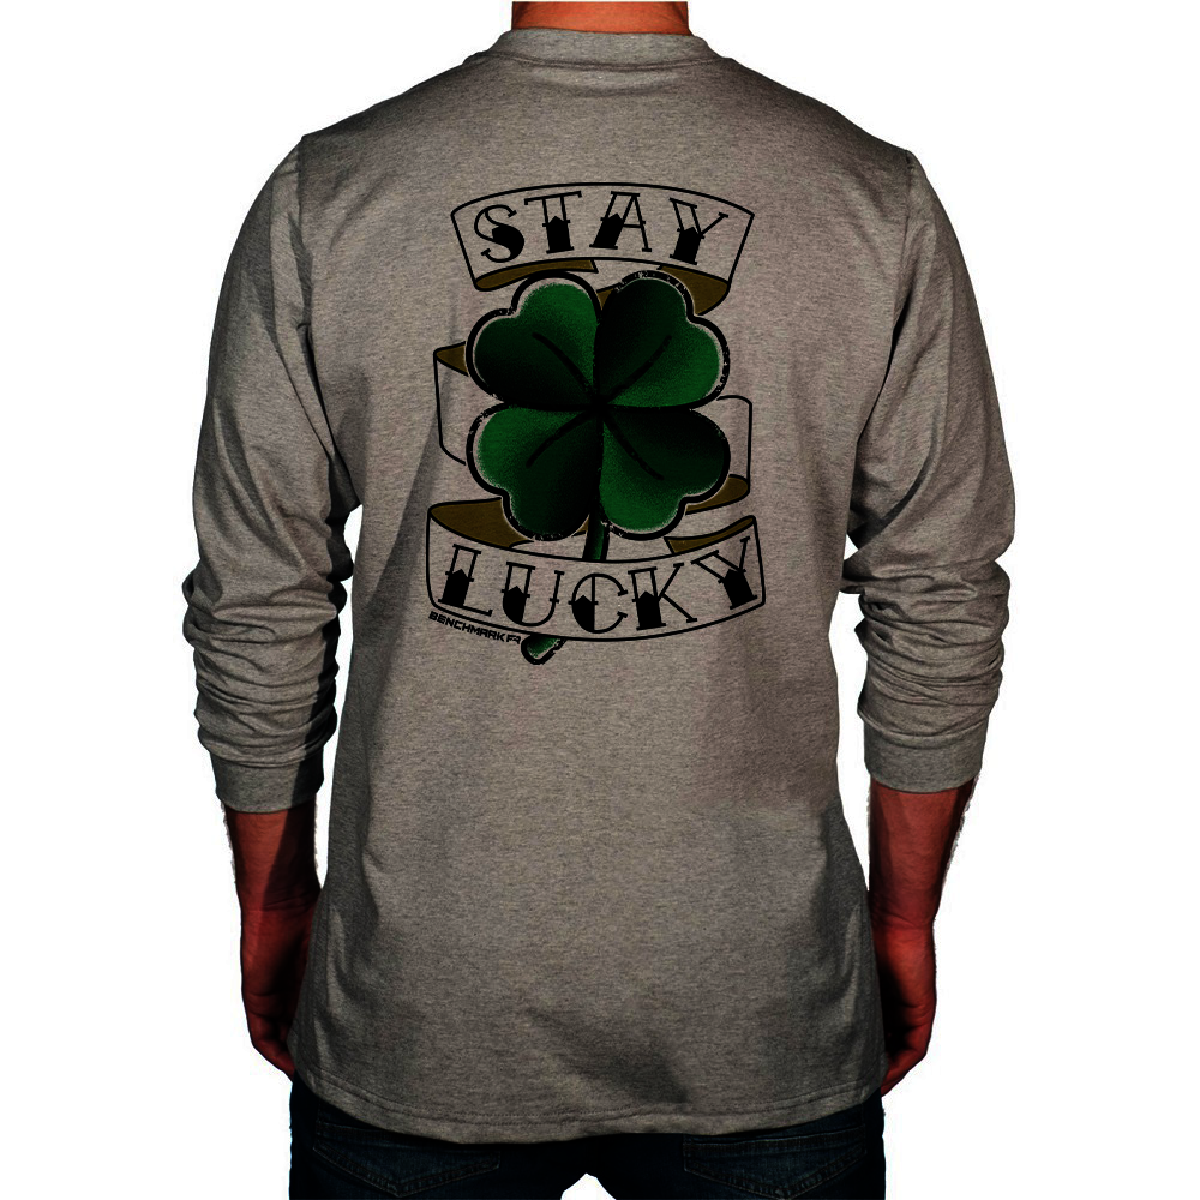 Benchmark FR Small Light Gray Second Gen Jersey Cotton Flame Resistant T-Shirt with Stay Lucky Graphic